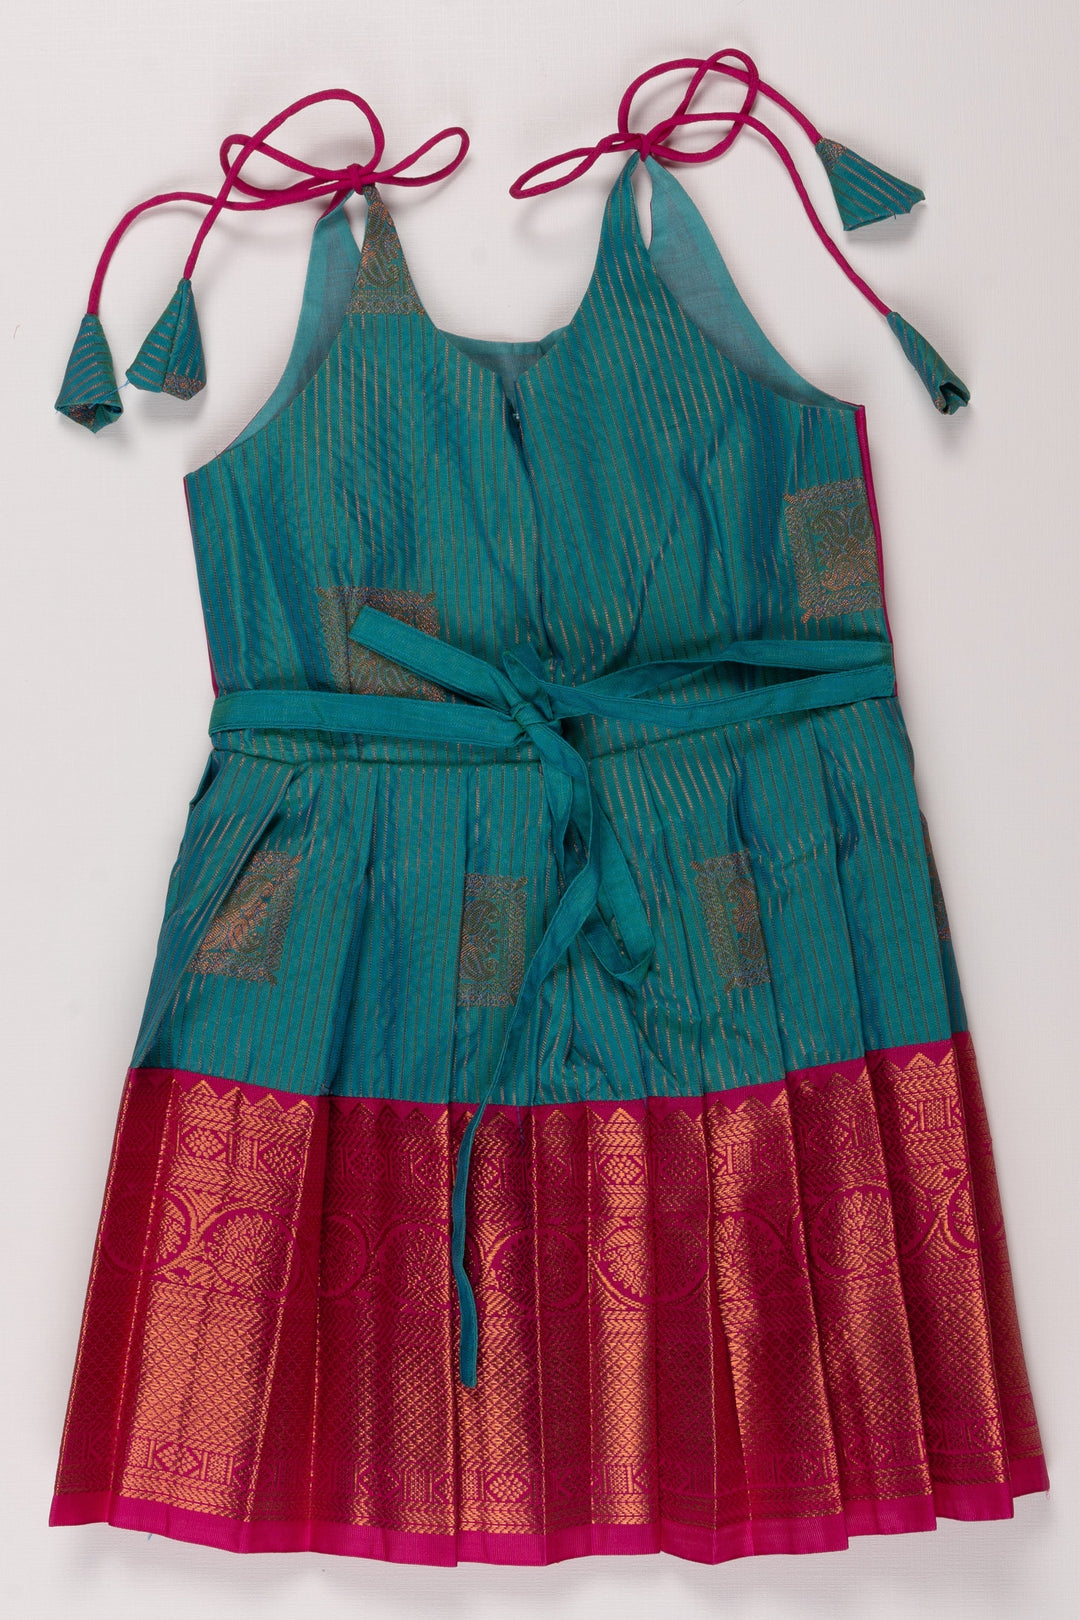 The Nesavu Tie Up Frock Teal Blue and Magenta Silk Frock with Zari Weave and Tie-Up Details Nesavu Teal and Magenta Silk Frock for Girls with Zari Detail | Festive and Playful | The Nesavu